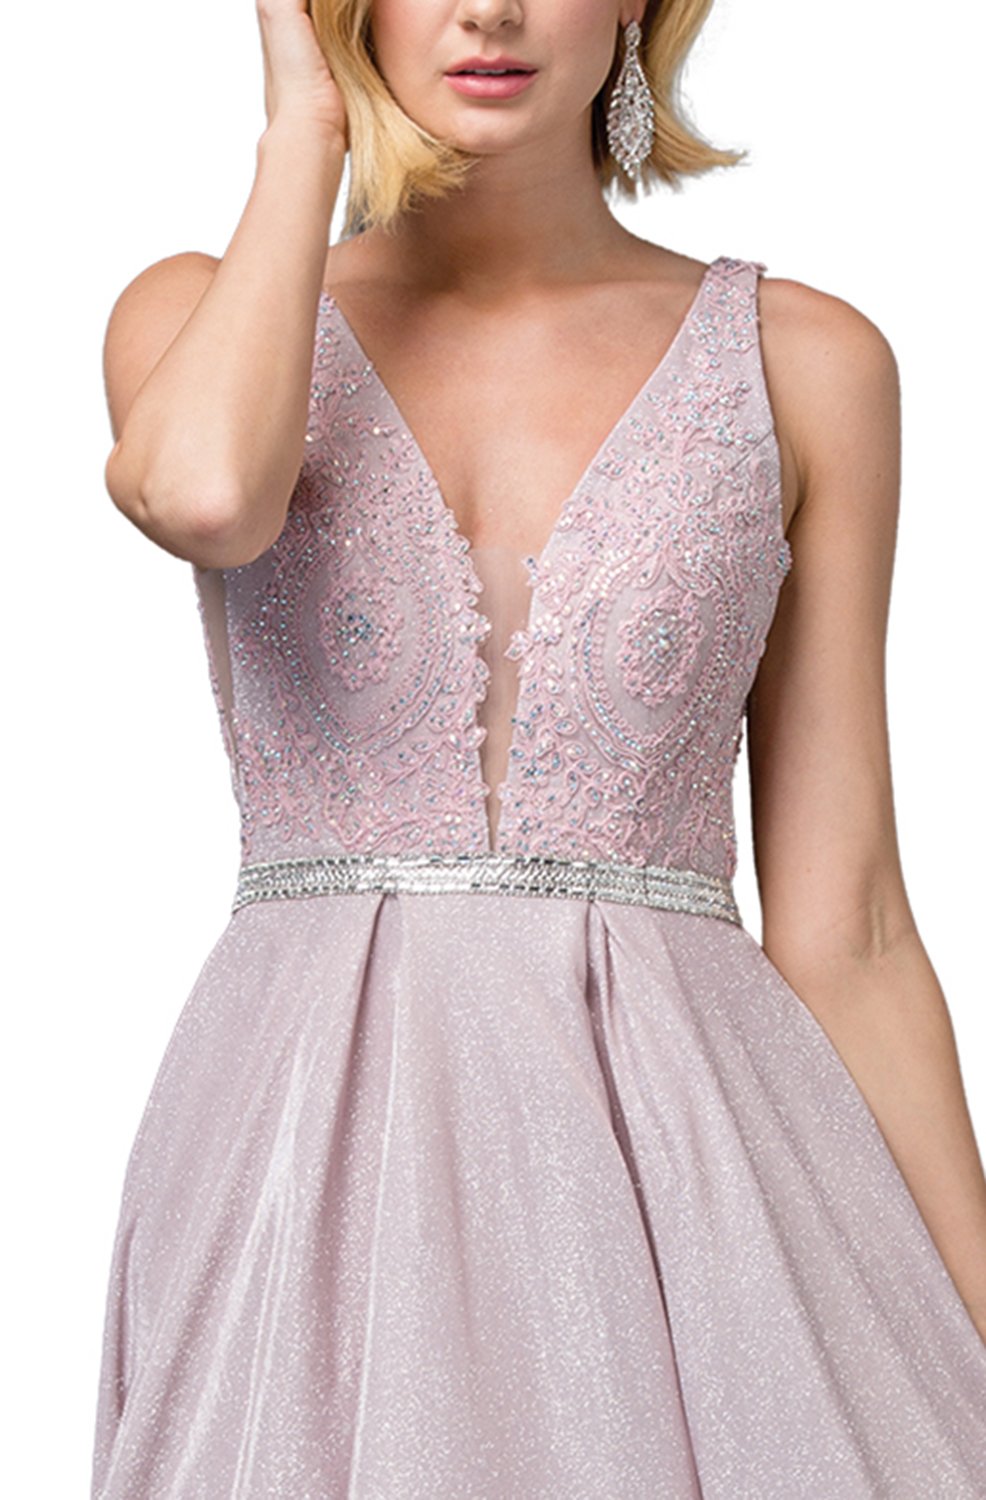 Dancing Queen - 2880 Plunging Back Jeweled Lace A-Line Dress